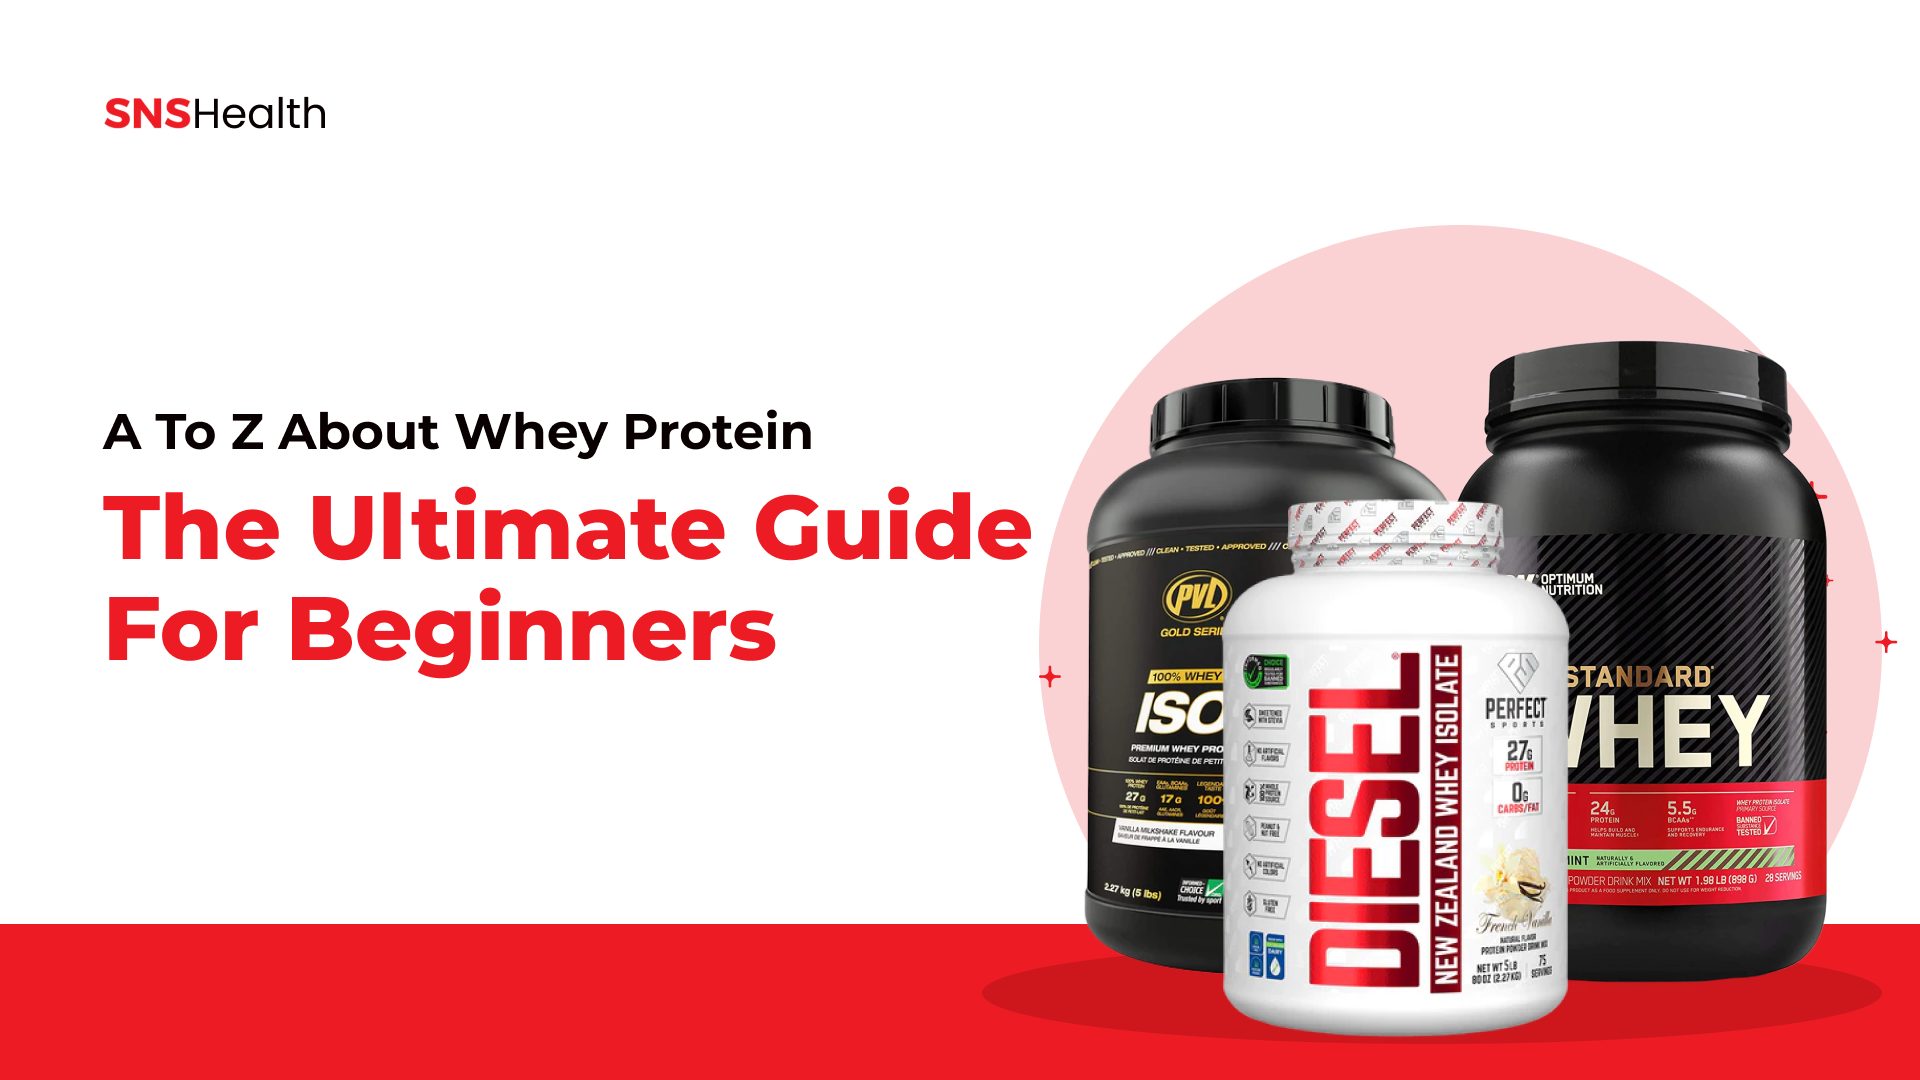 A to Z About Whey Protein: The Ultimate Guide for Beginners  